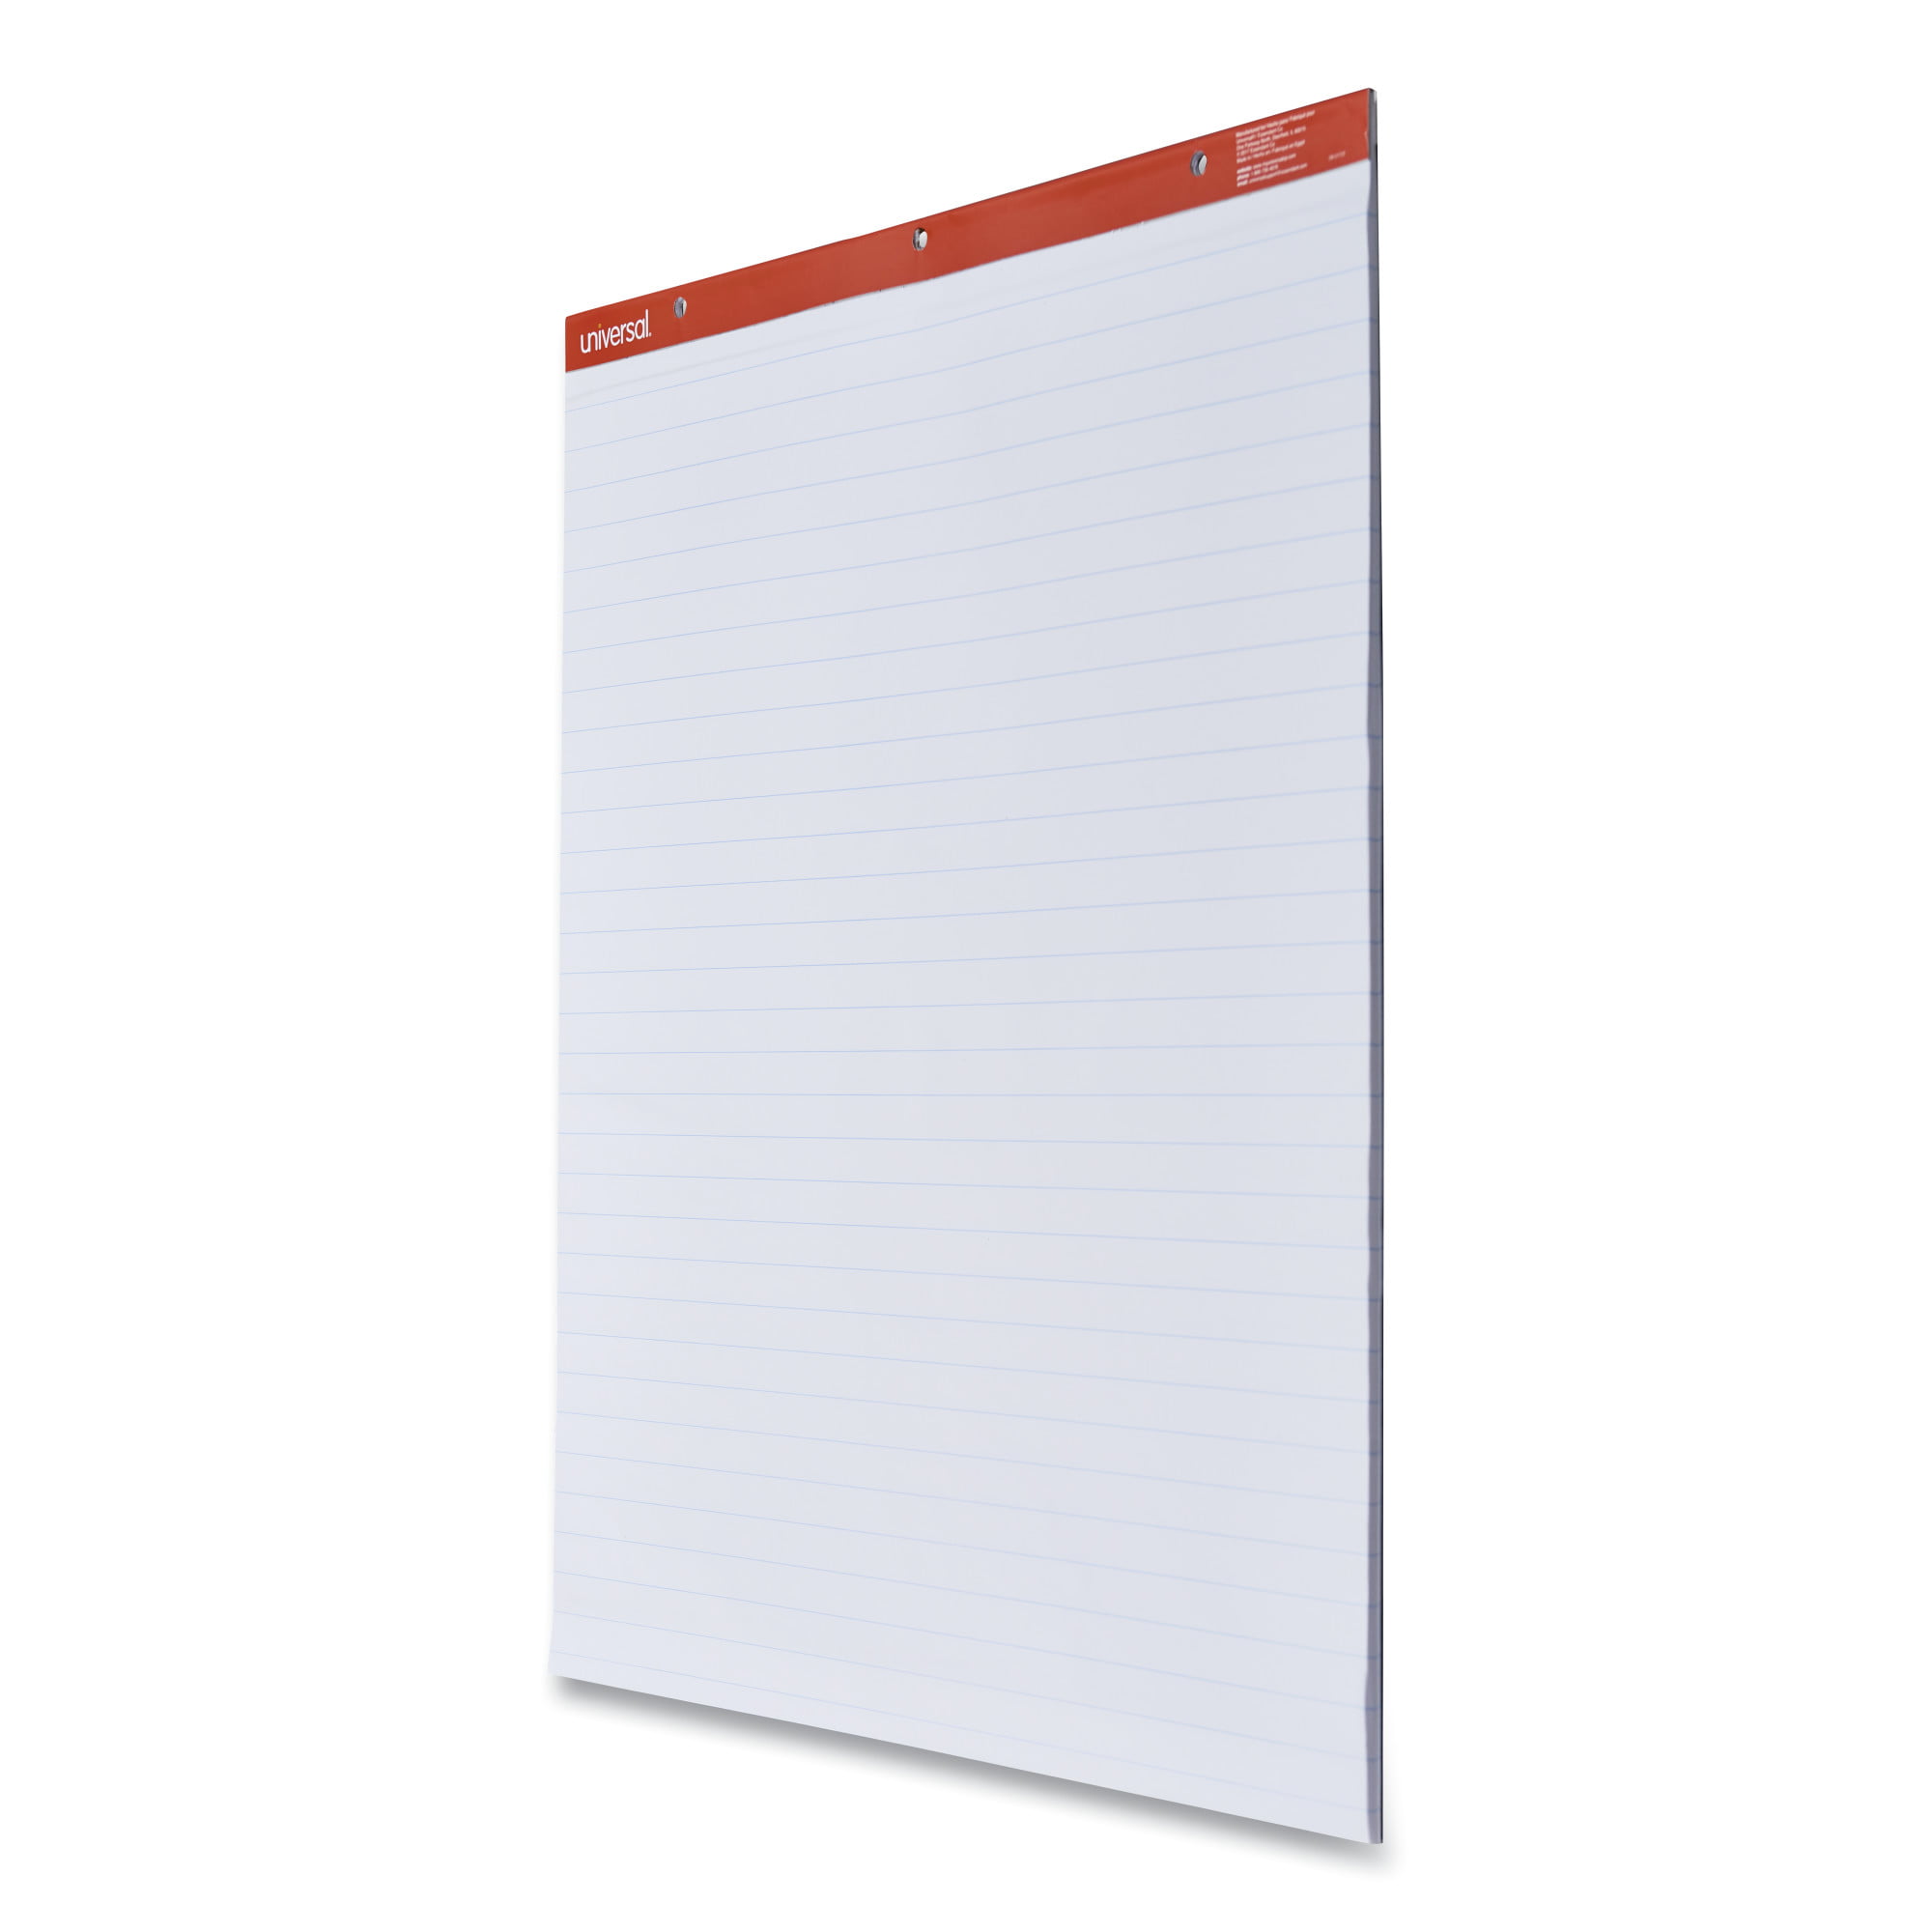 Easel Pad, Non-Adhesive, White, Unruled 27 x 34, 50 Sheets - PAC3385, Dixon Ticonderoga Co - Pacon